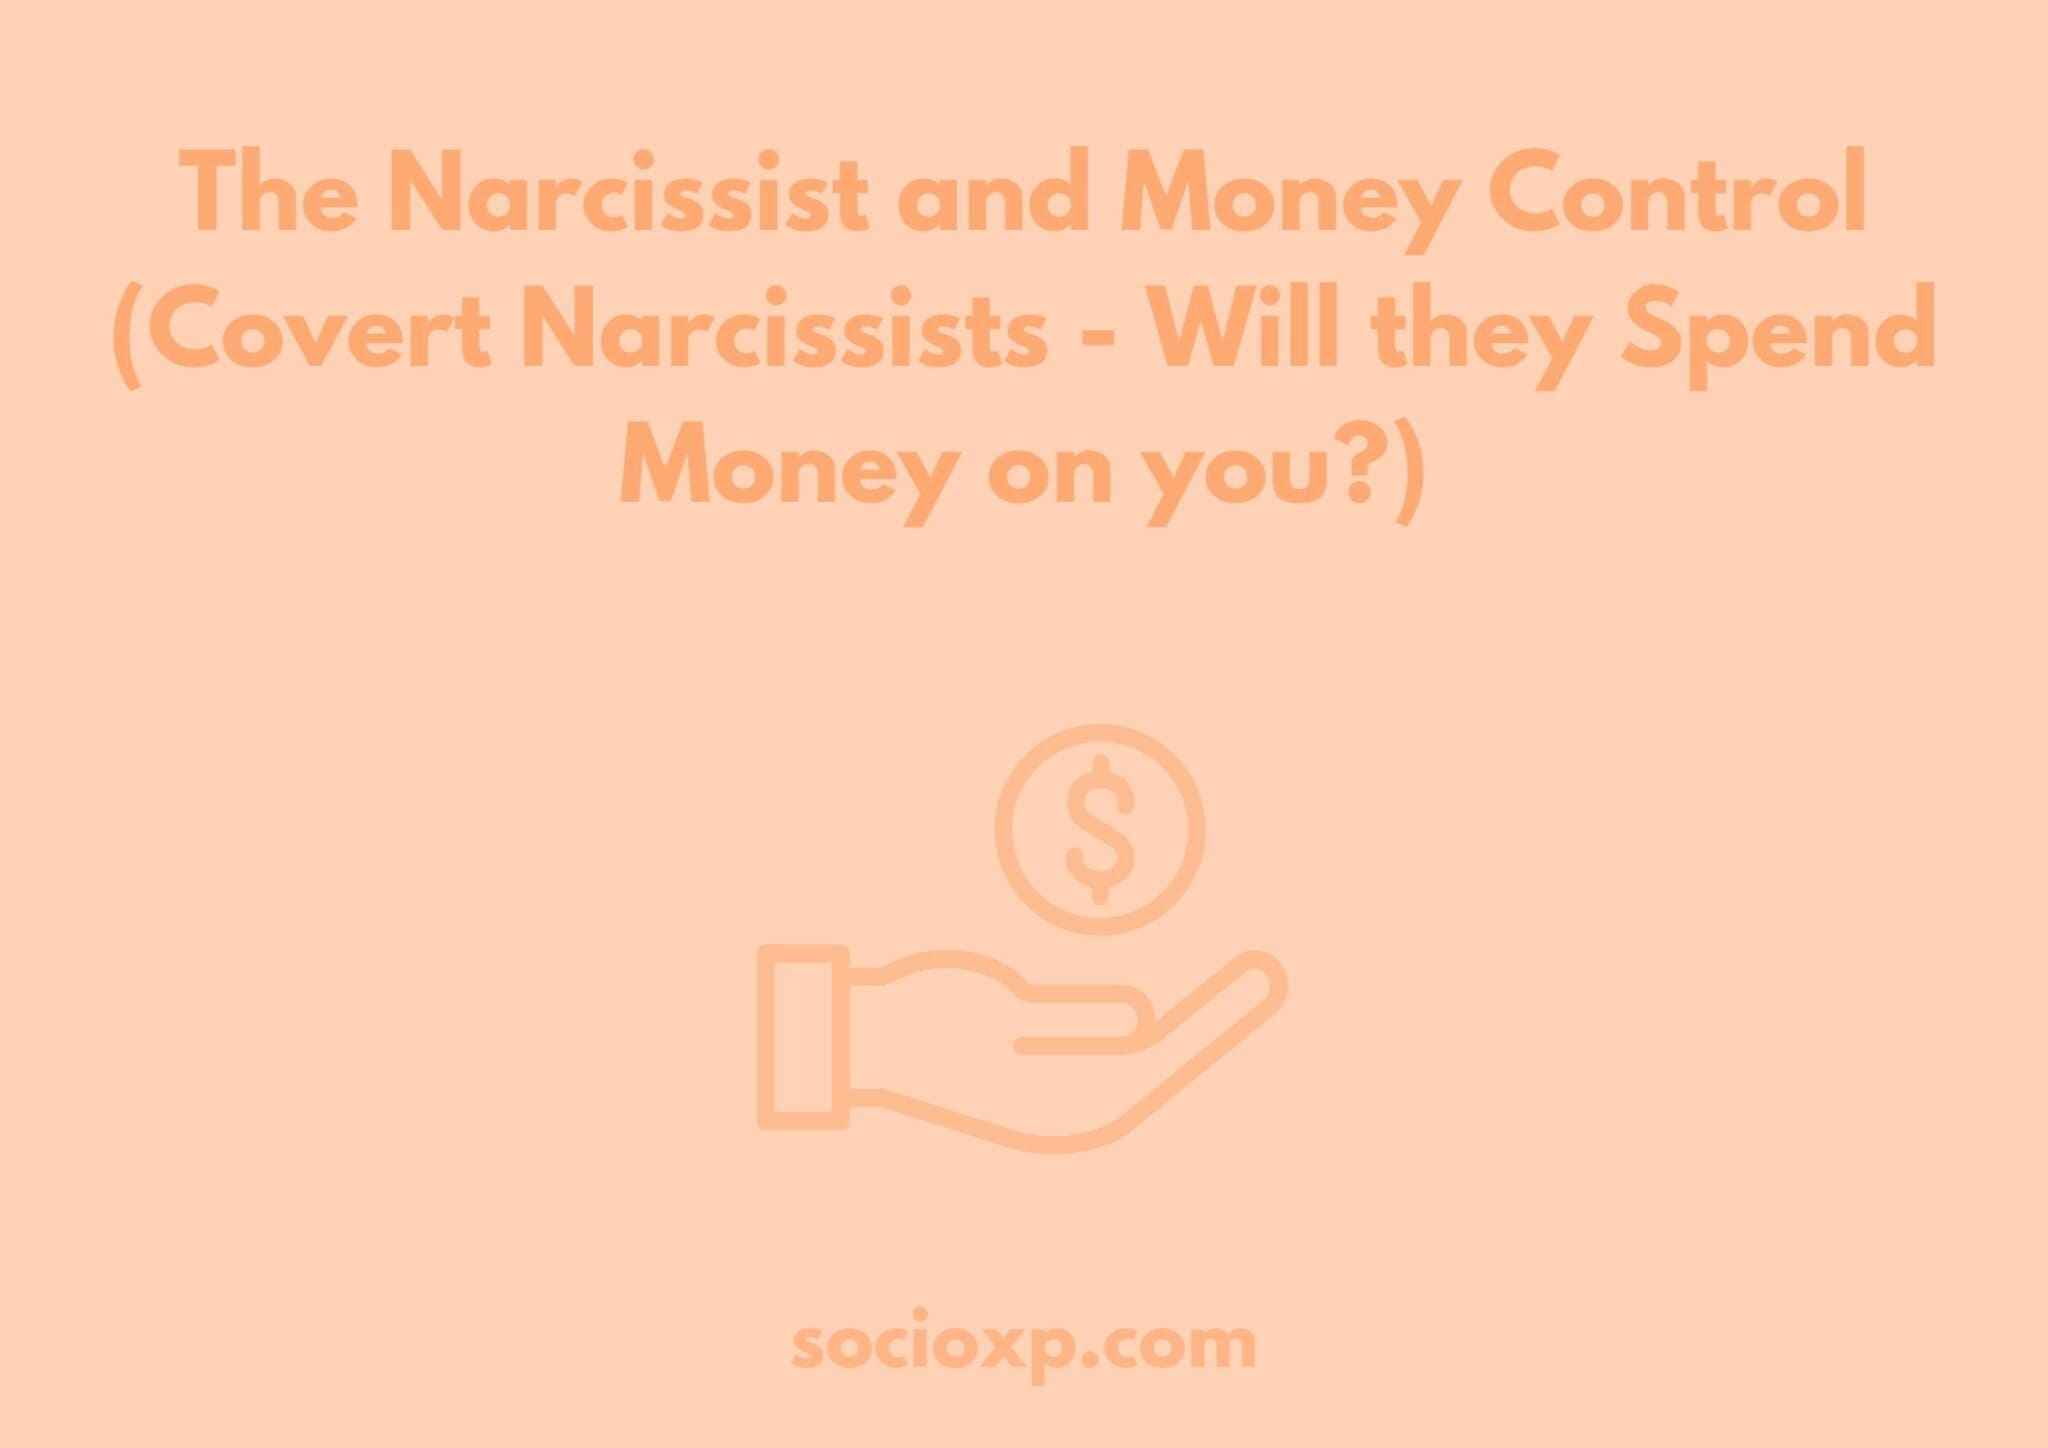 The Narcissist and Money Control (Covert Narcissists - Will they Spend Money on you?)